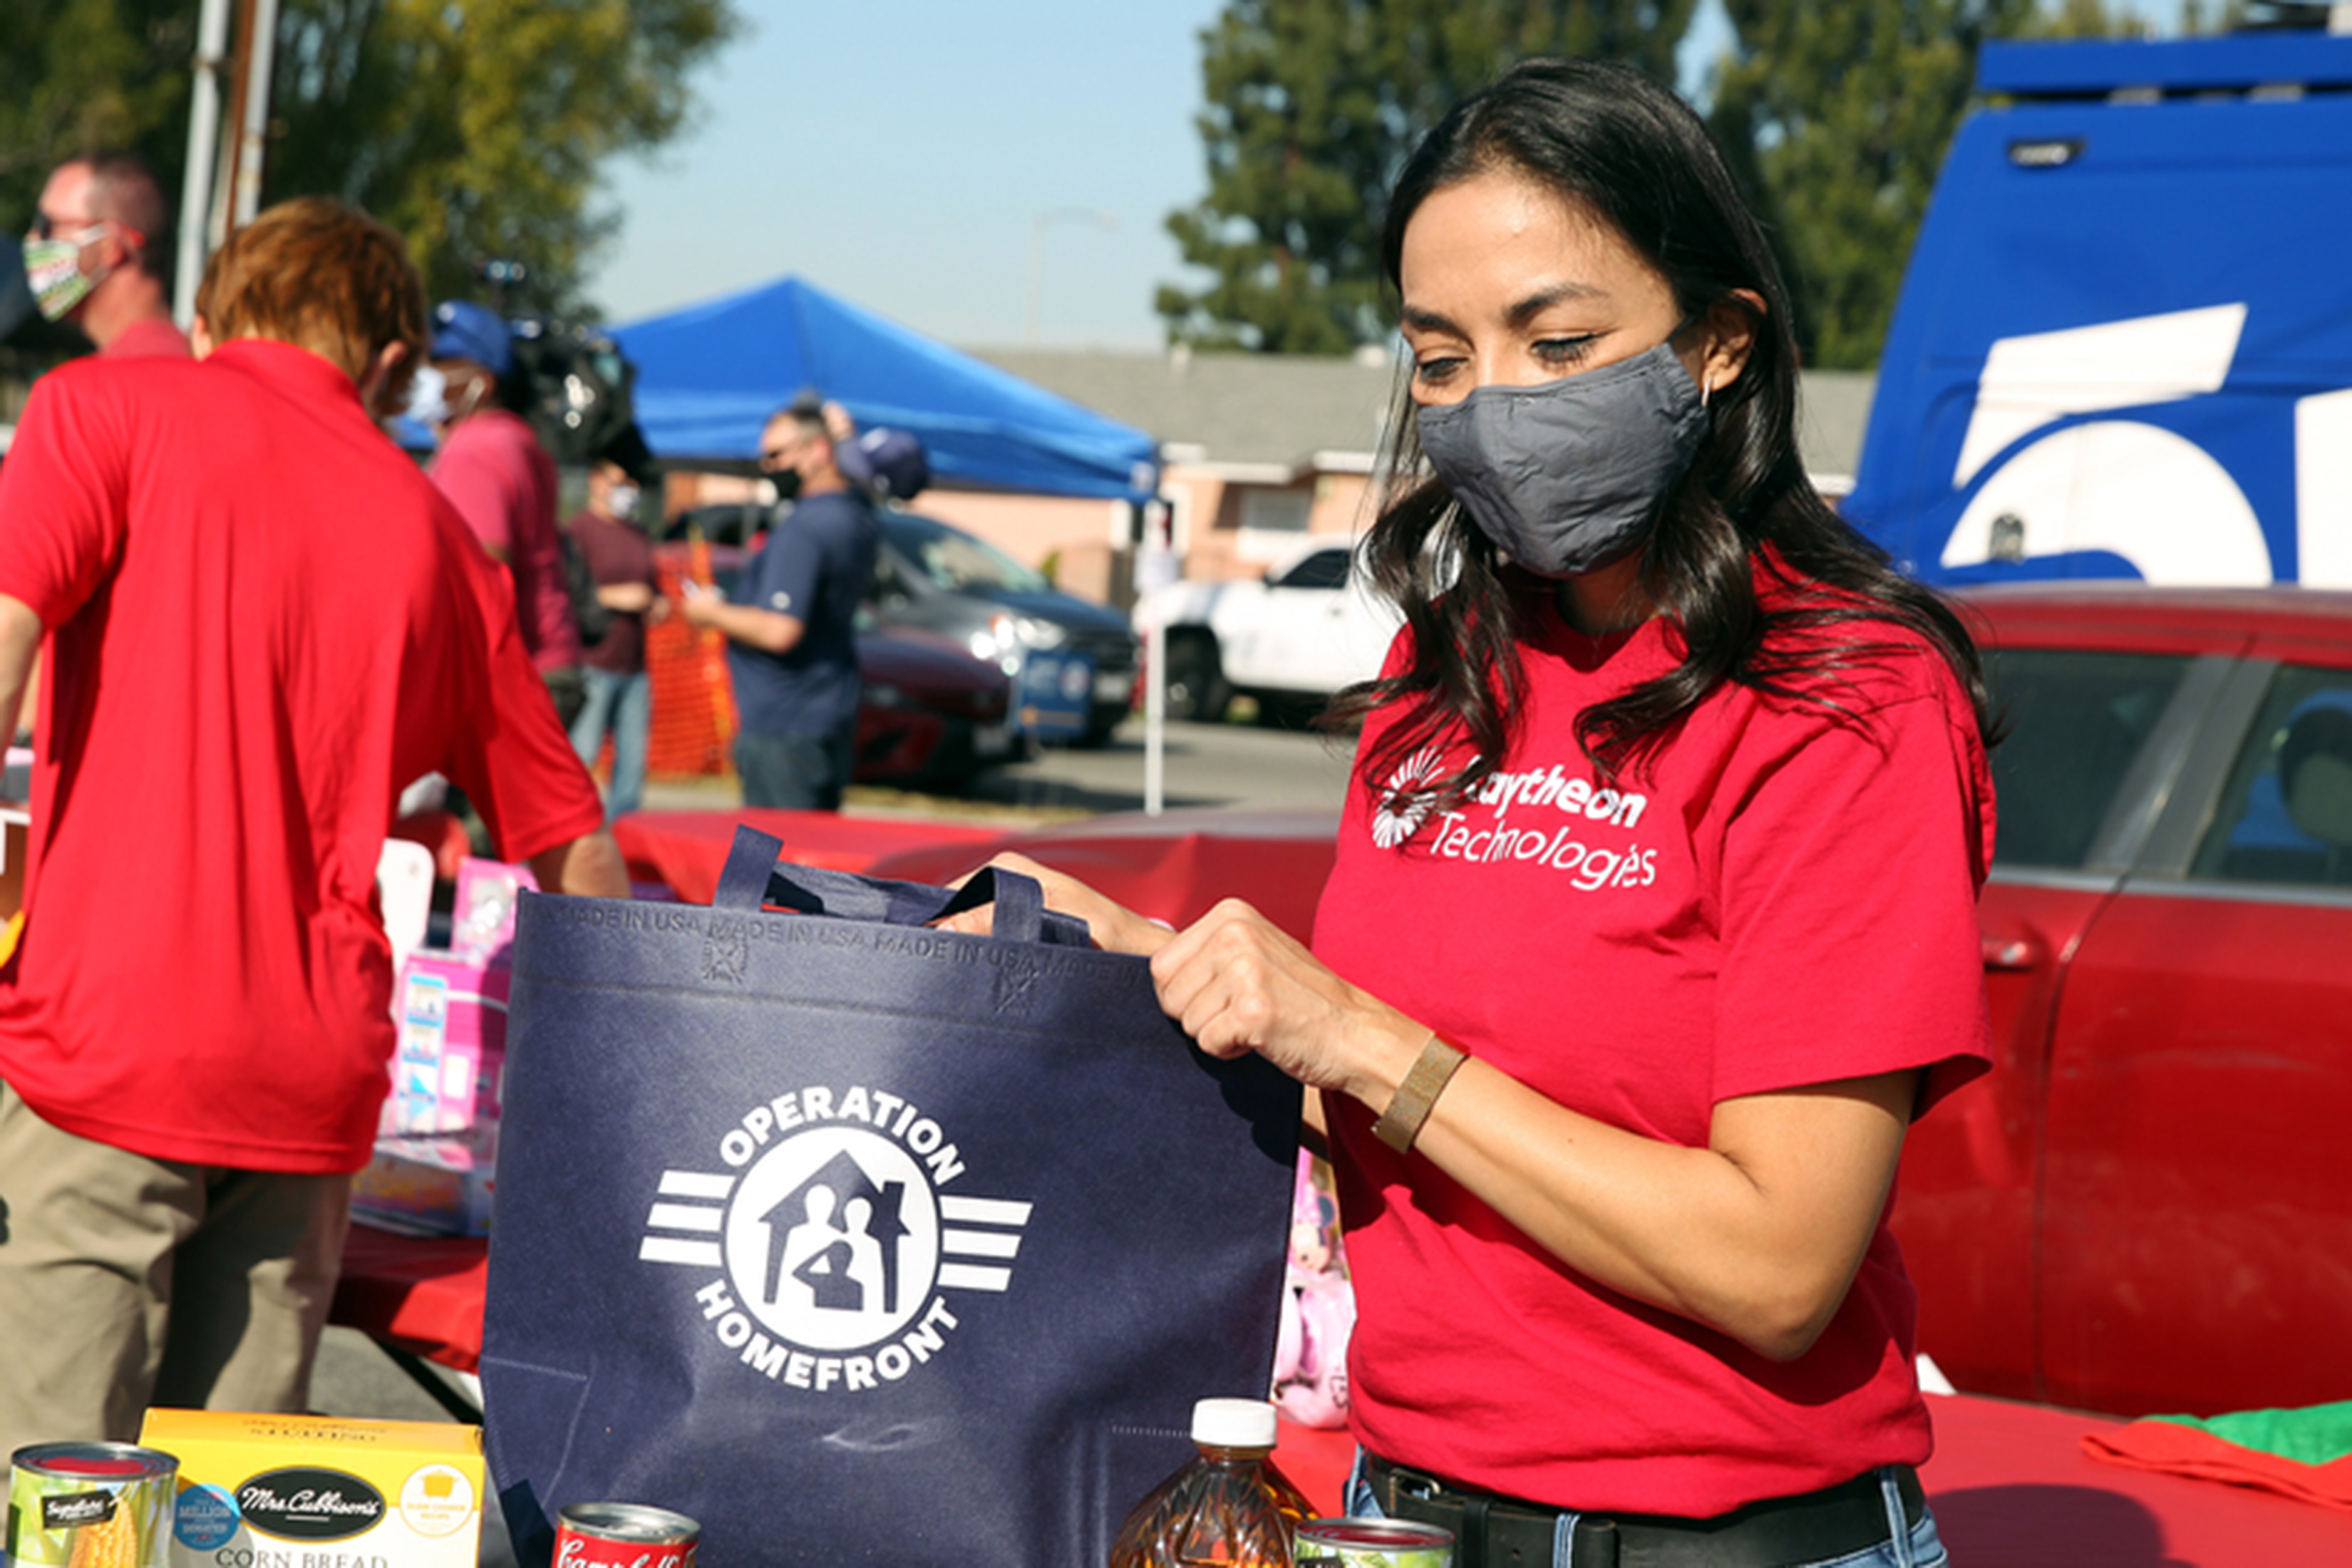 Annabel Flores is shown outside wearing a red Raytheon shirt and gray facemask. She is holding a blue bag that sits on a table with some canned goods.